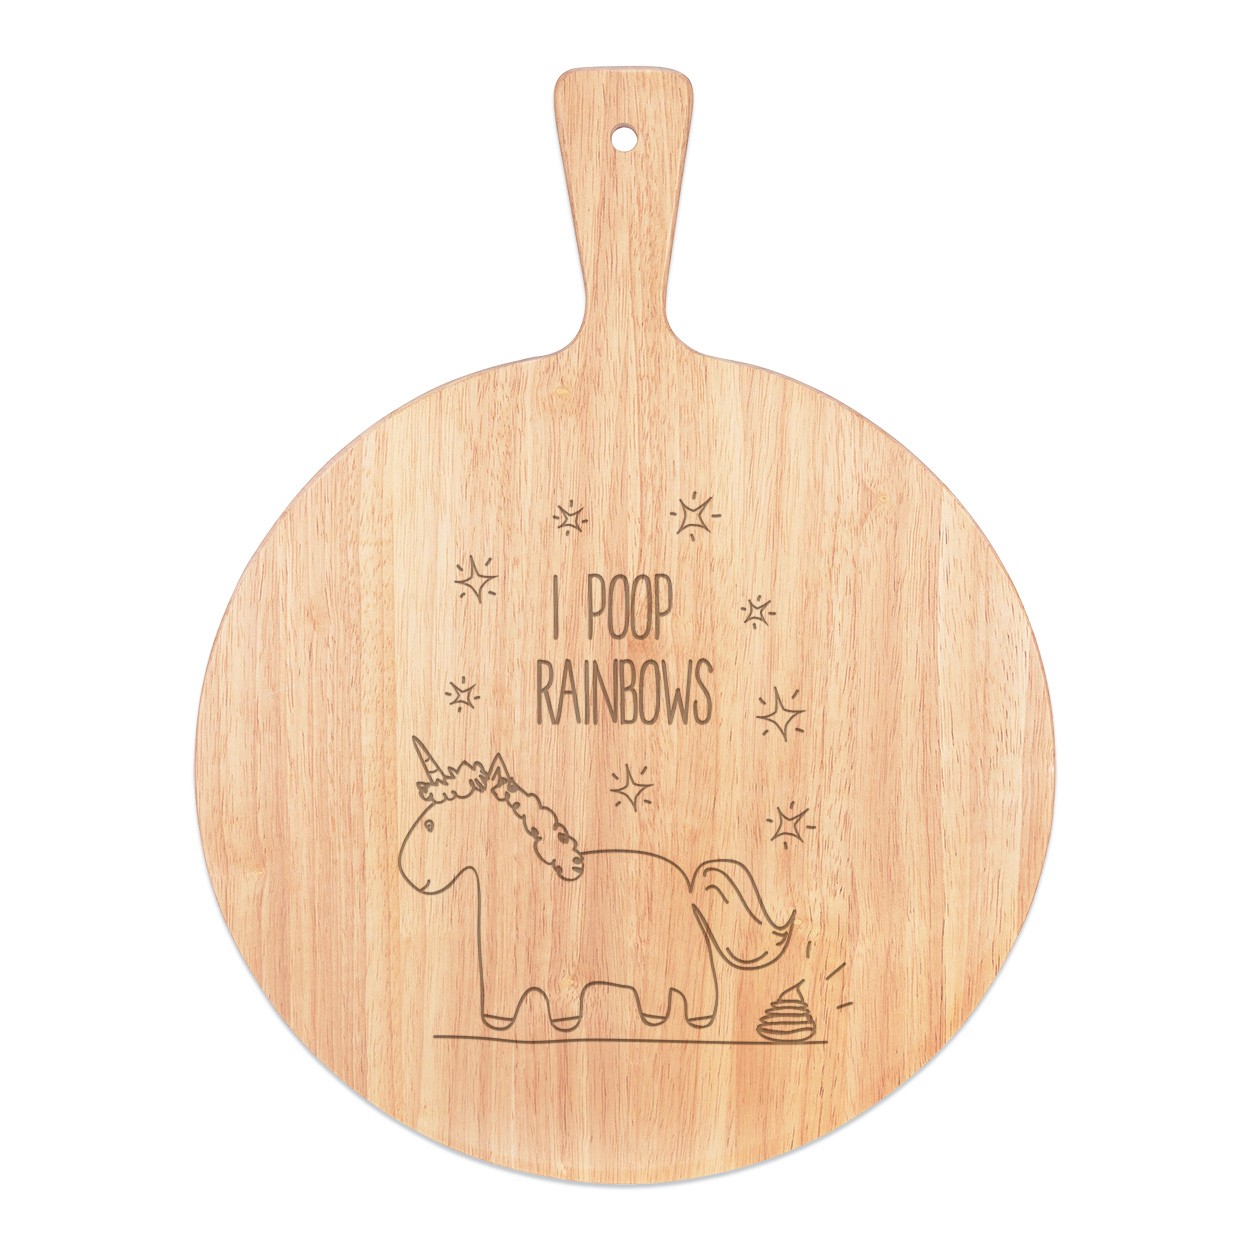 Lila Unicorn I Poop Rainbows Pizza Board Paddle Serving Tray Handle Round Wooden 45x34cm